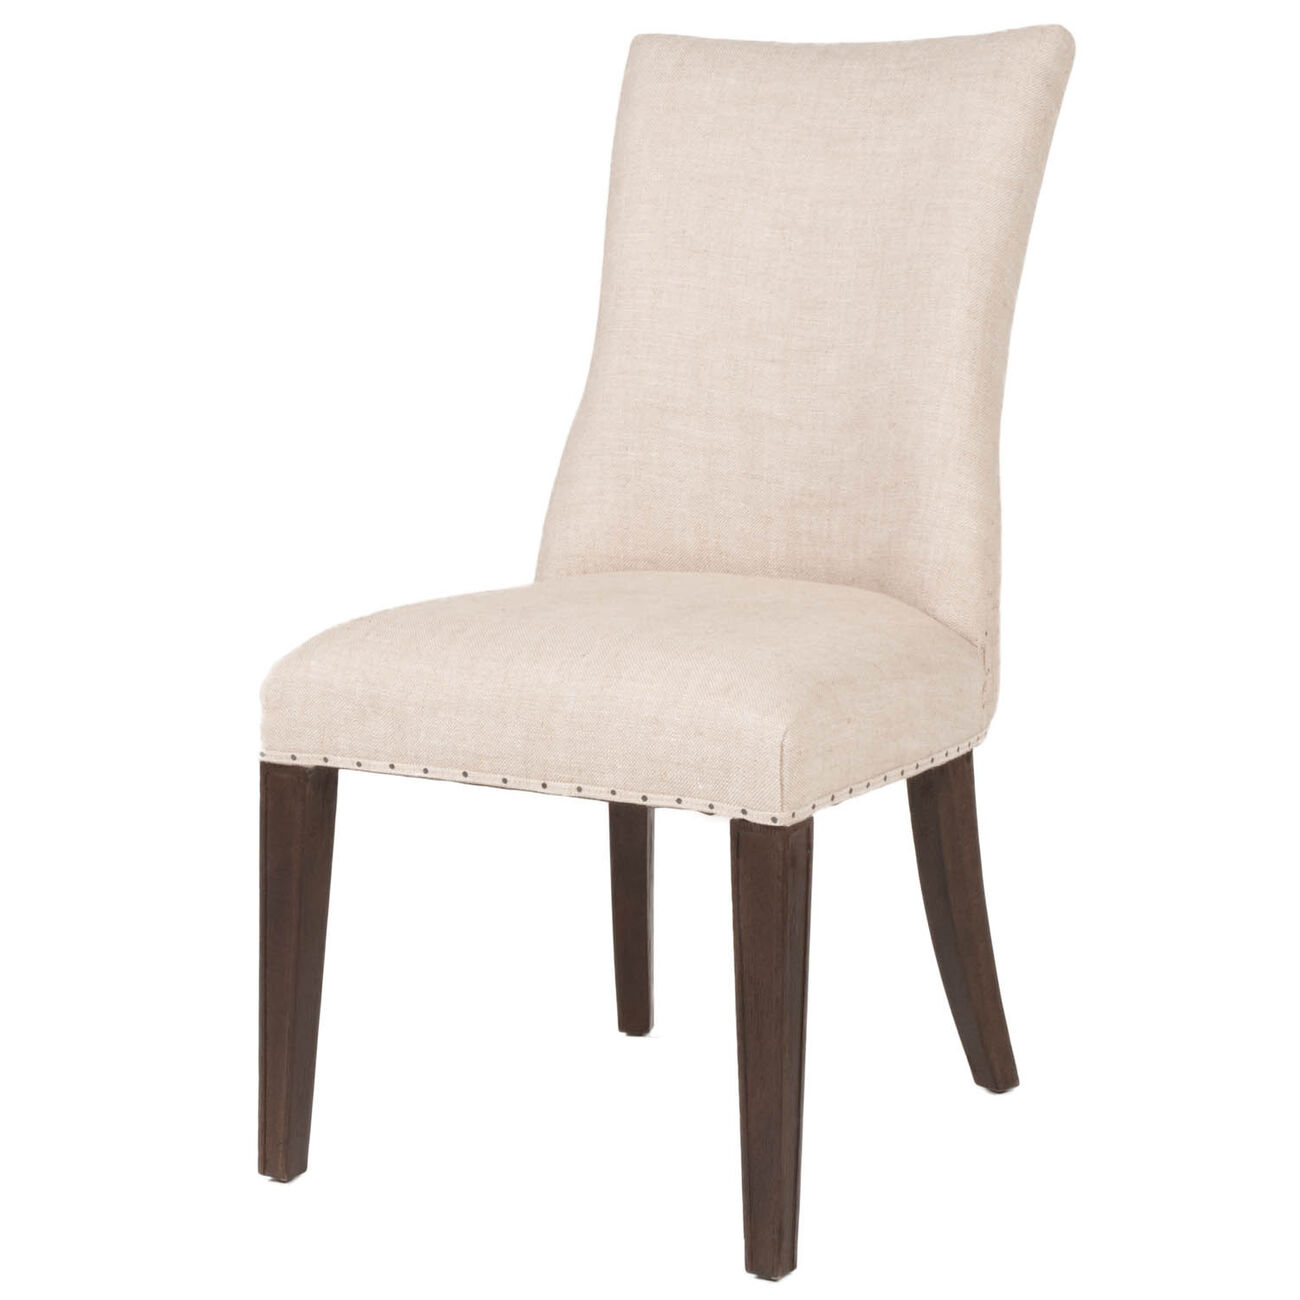 Wood And Linen Dining Chairs In Beige Finish, Set Of Two